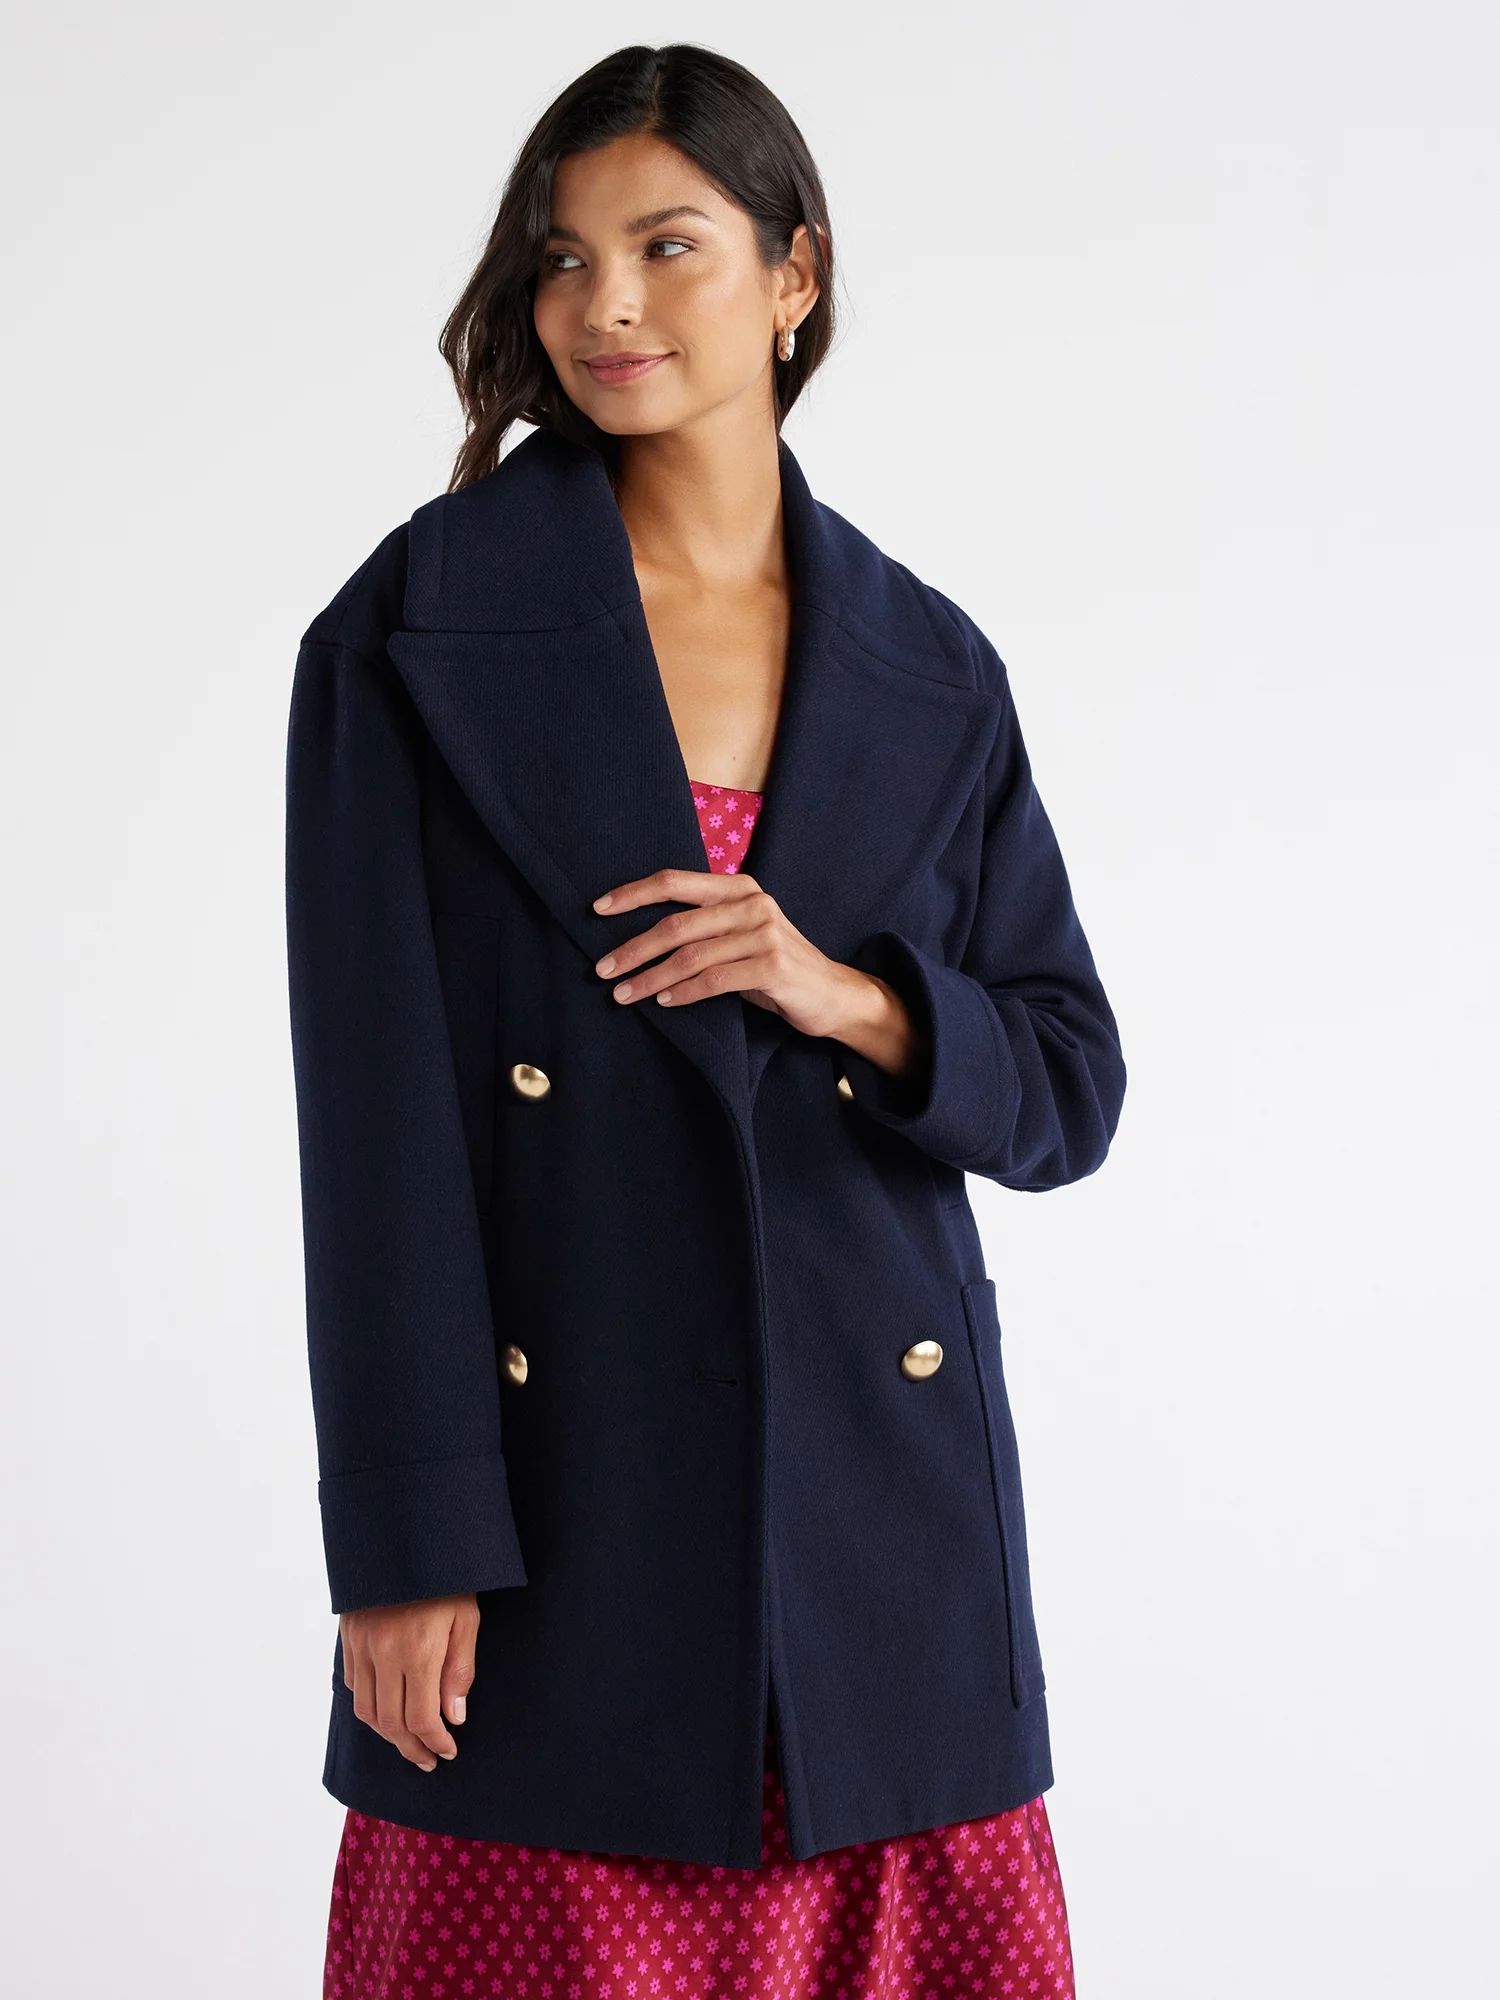 Free Assembly Women's Wool-Blend Peacoat with Patch Pockets, Sizes XS-XXXL | Walmart (US)